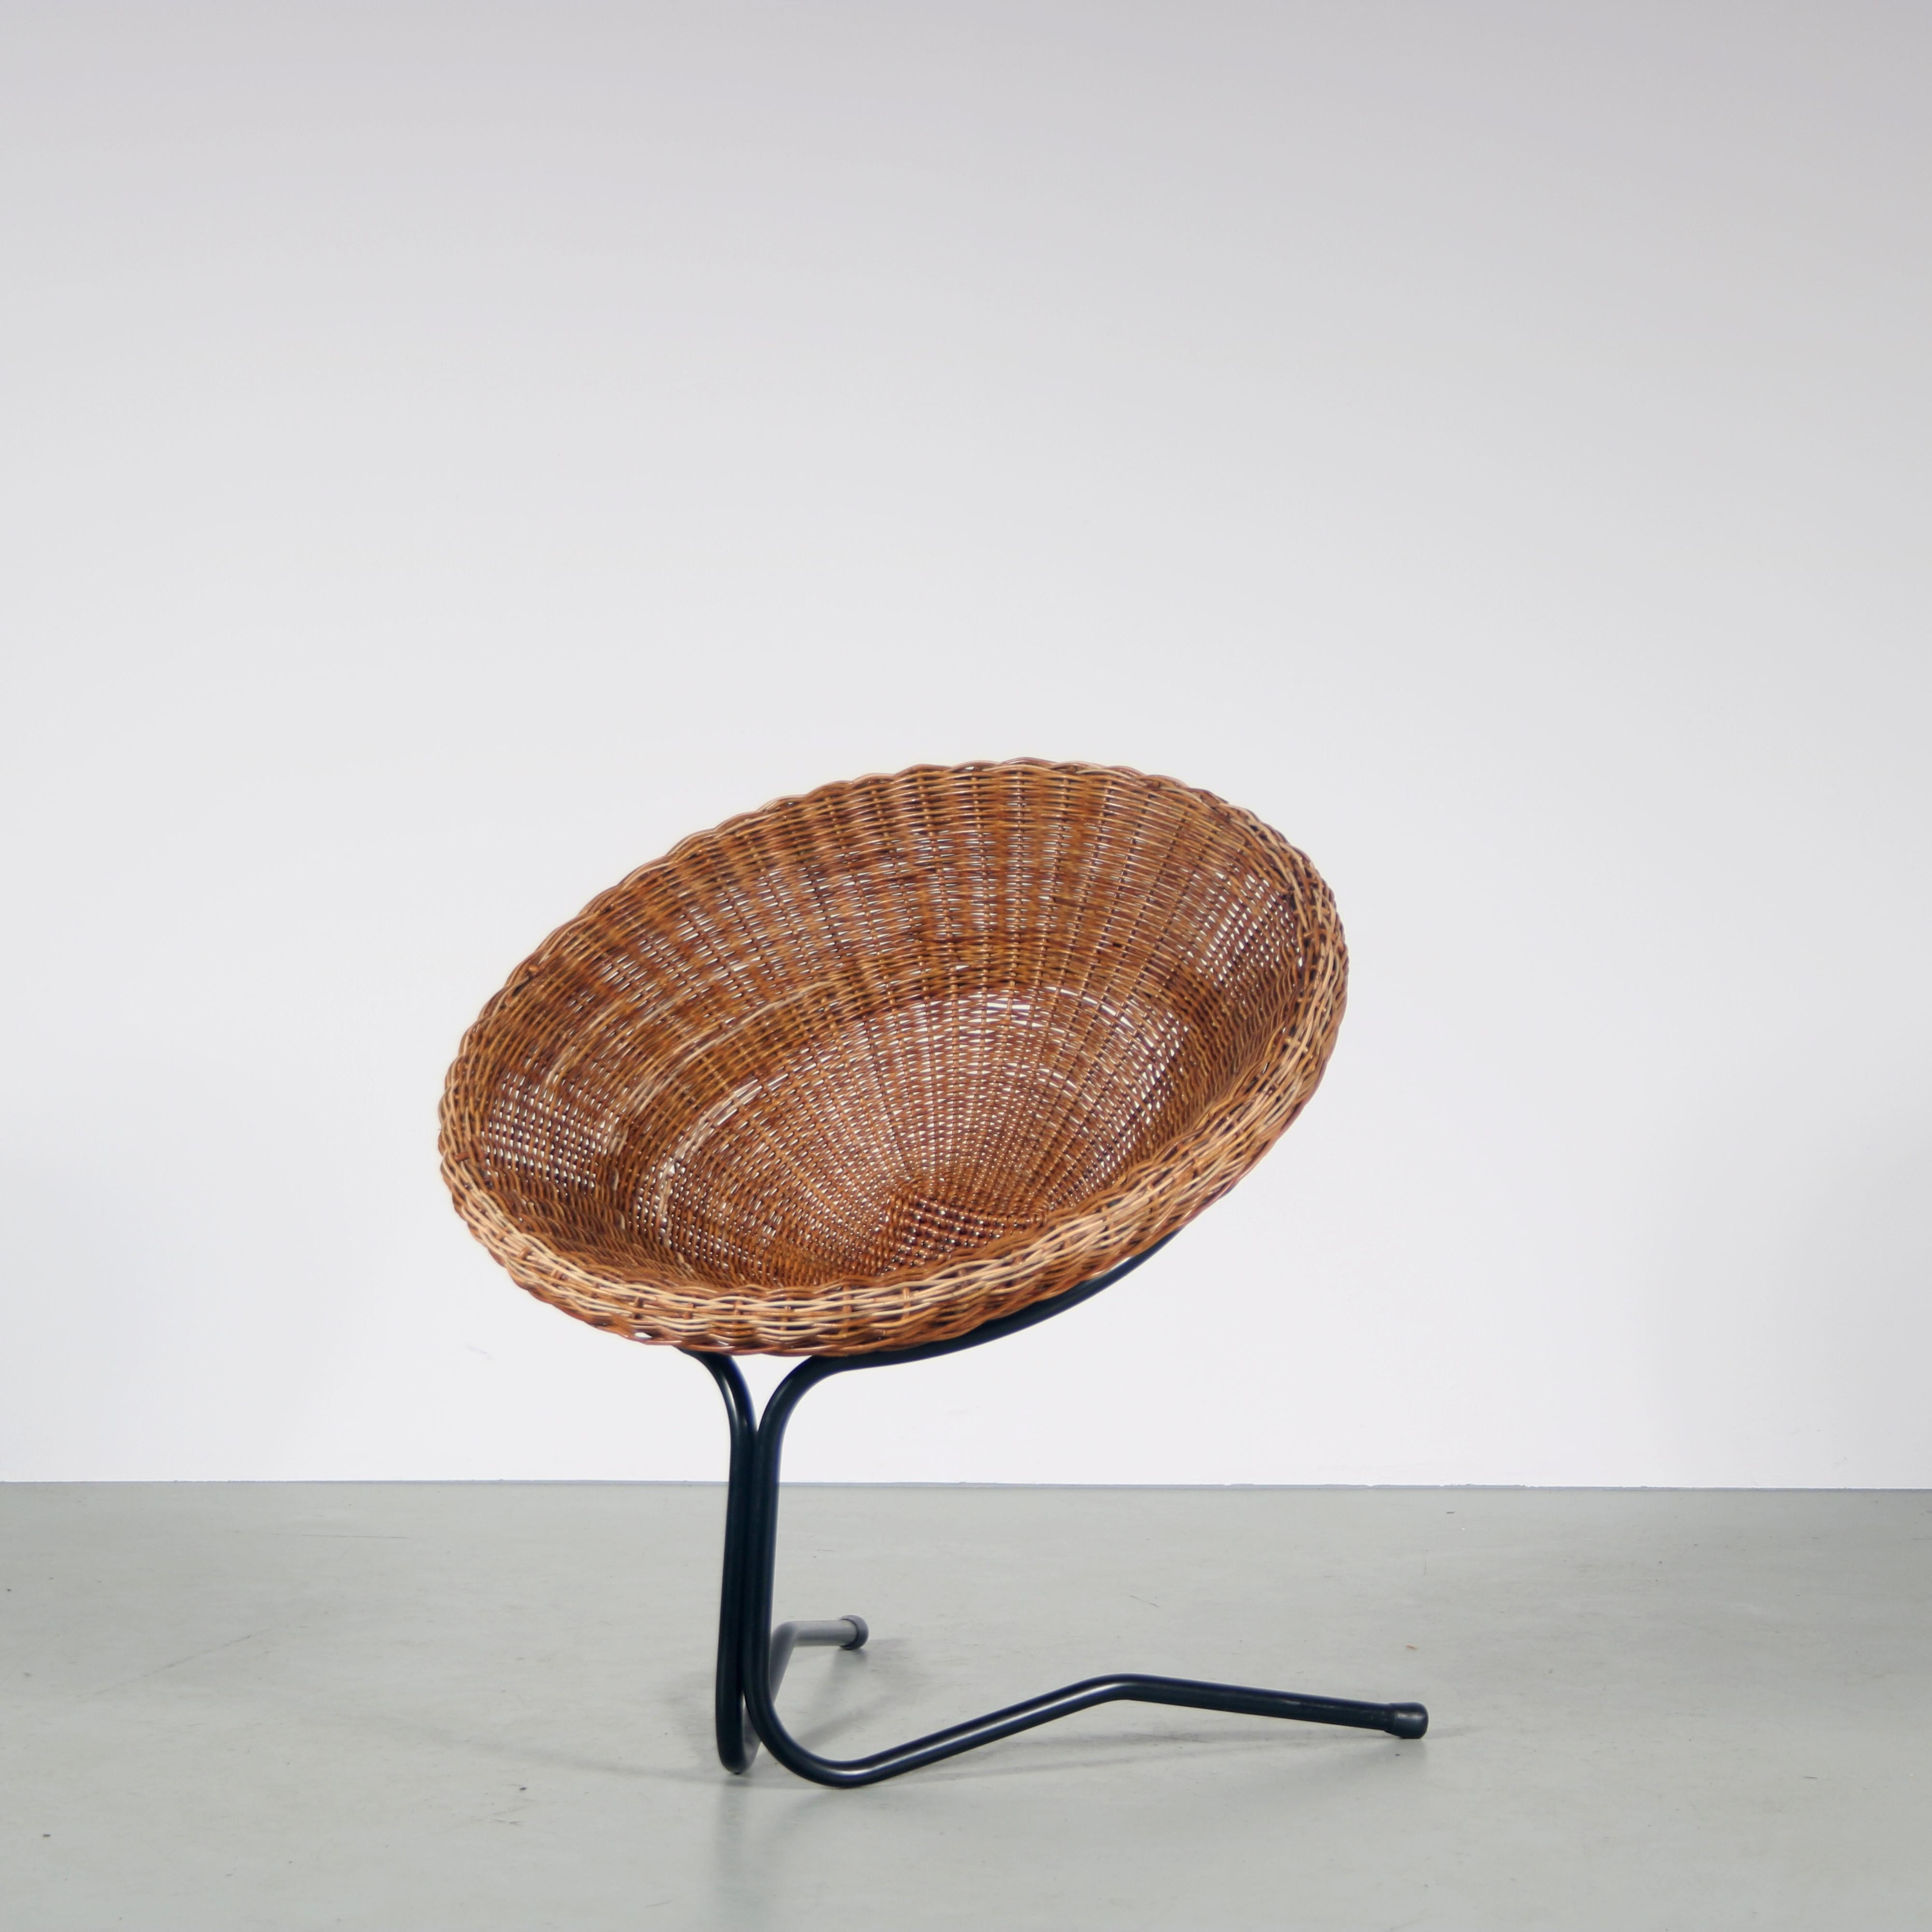 A lovely easy chair desigend by A. Bueno de Mesquita, manufactured by Rohé in the Netherlands around 1950.

This eye-catching piece has a round seat, standing on a V-shaped, black lacquered tubular metal base. The wicker shell rests in the round